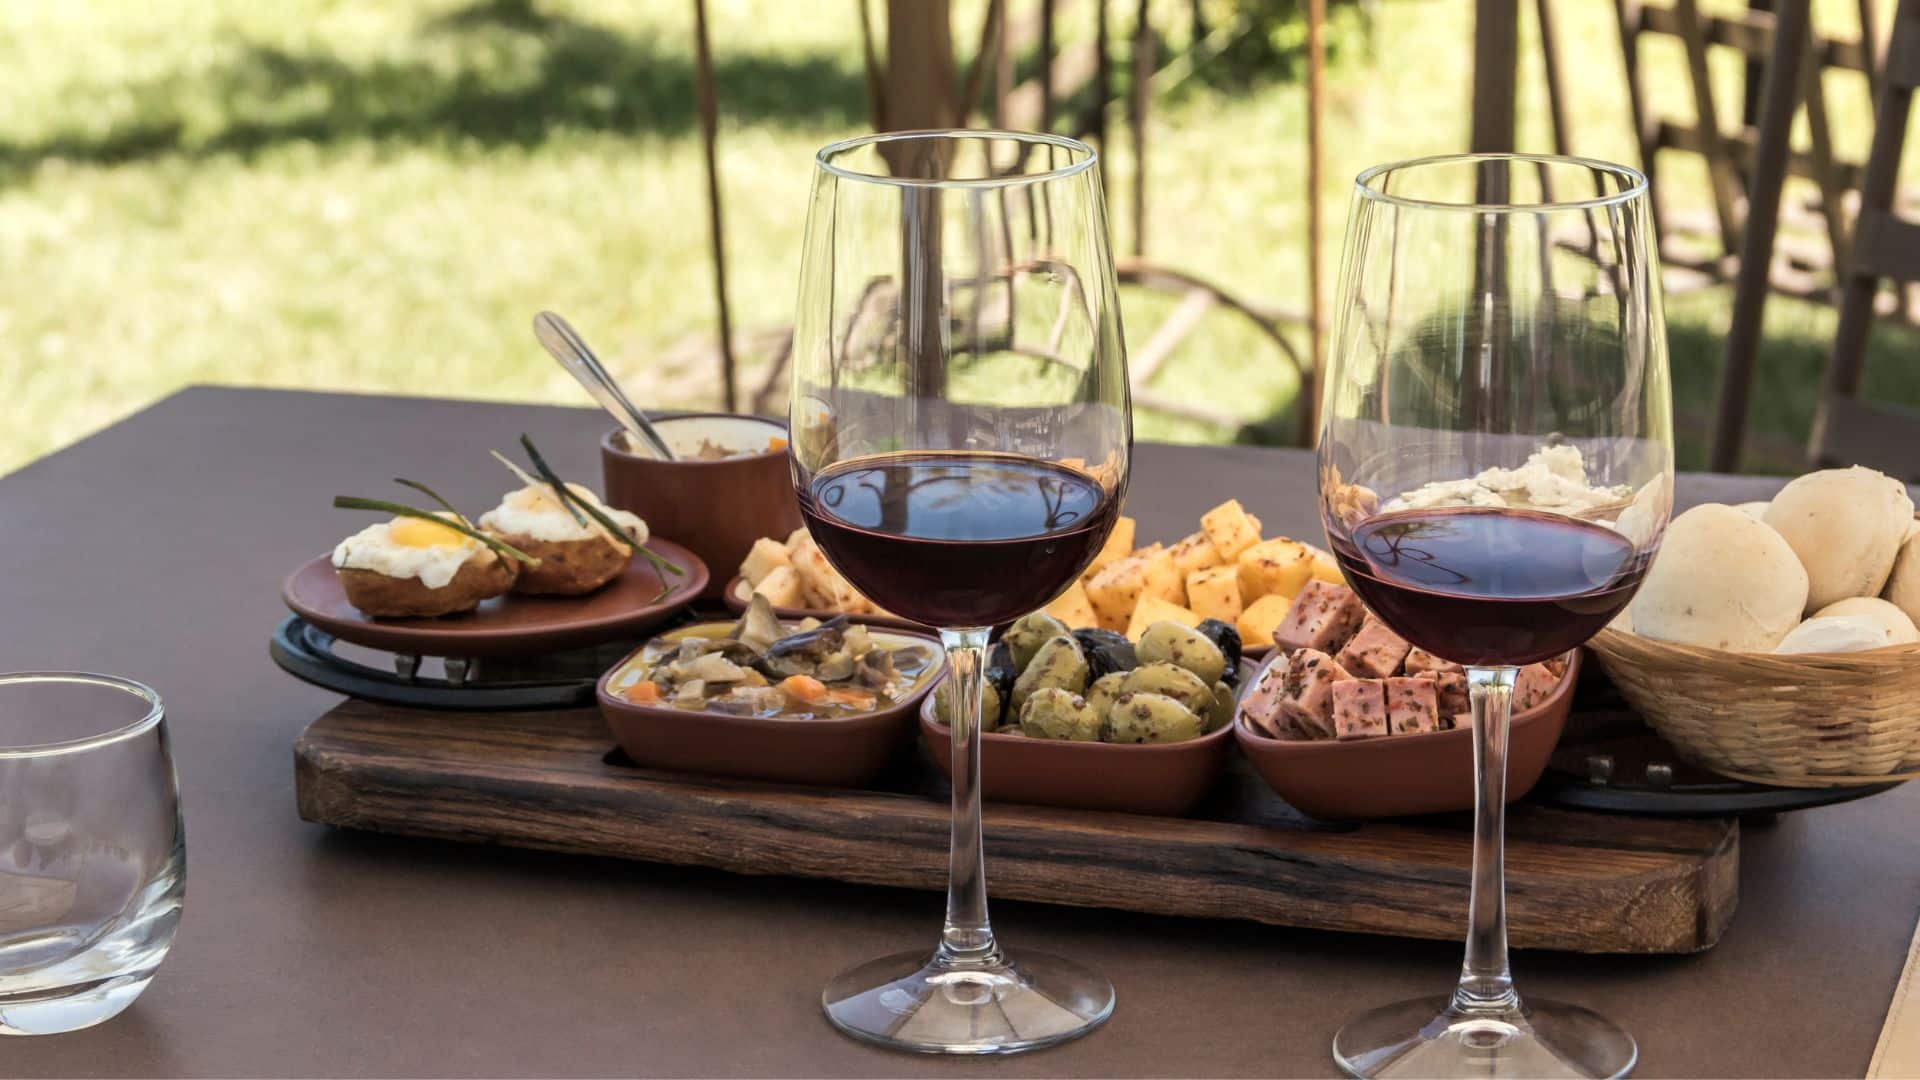 Two glasses of red wine are in front of a board of cheese, olives, and other wine-tasting nibbles.